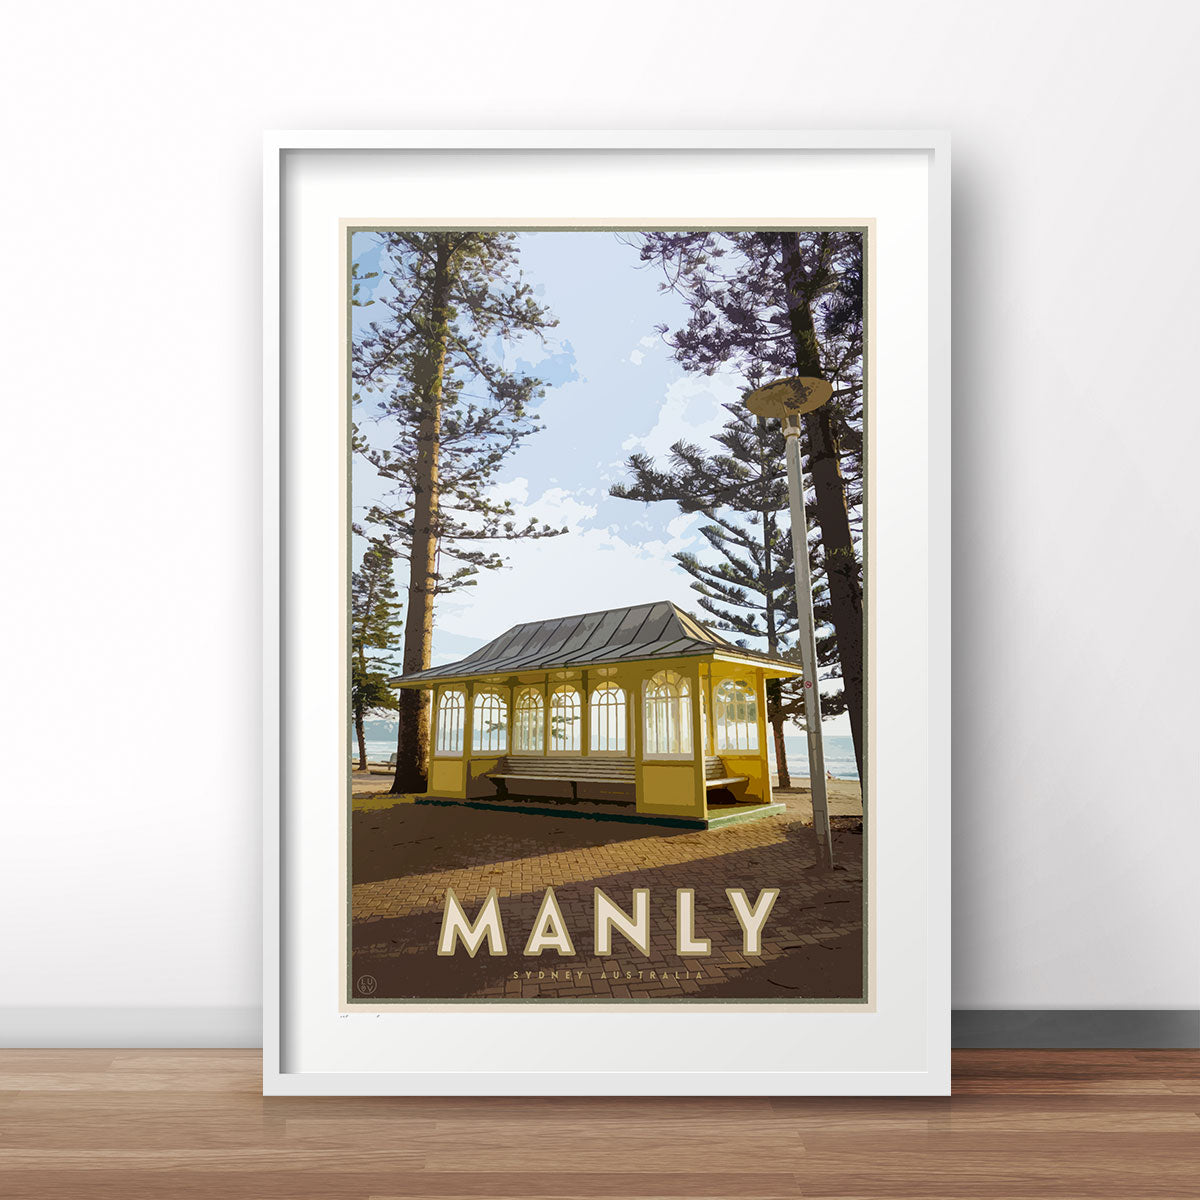 Manly Beach vintage travel style poster by places we luv